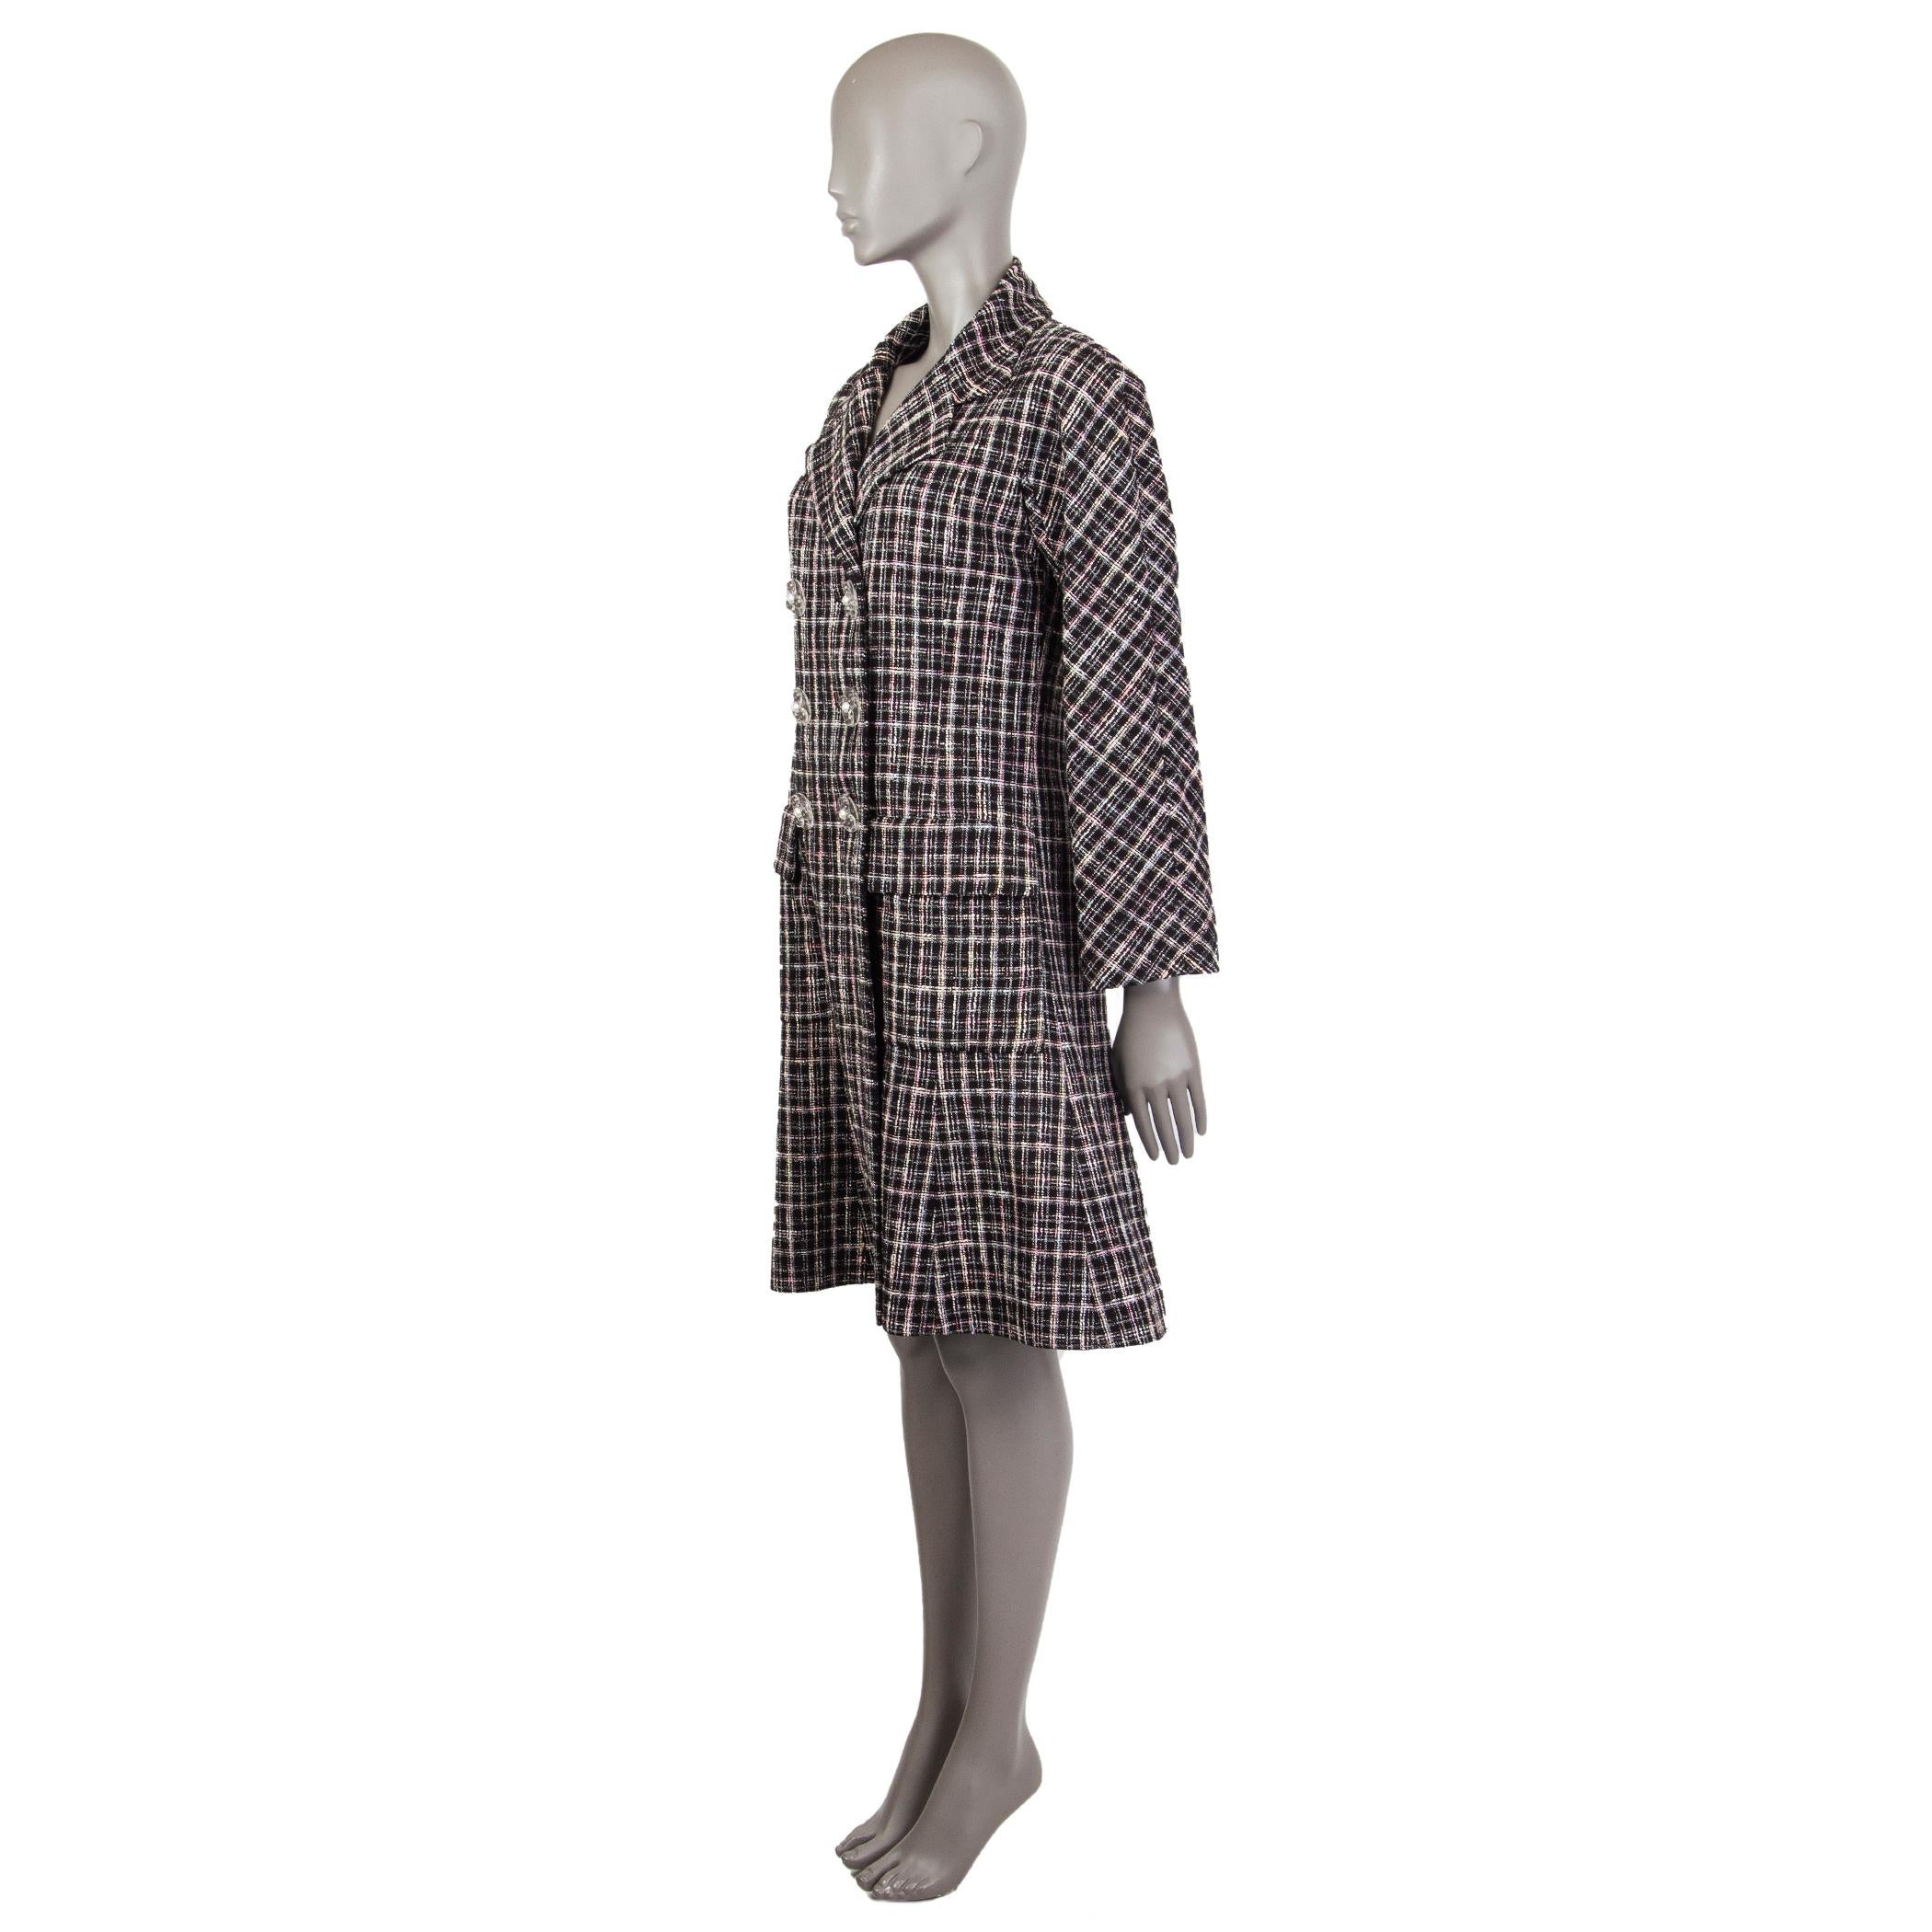 Chanel plaid-tweed double-breasted coat in black, off.white, pink, lavender, lime, and red polyester (39%), acrylic (18%), rayon (14%), ramie (9%), cotton (9%), linen (8%), metal fibers (5%), and nylon (2%). Spring 2018 collection. With notch